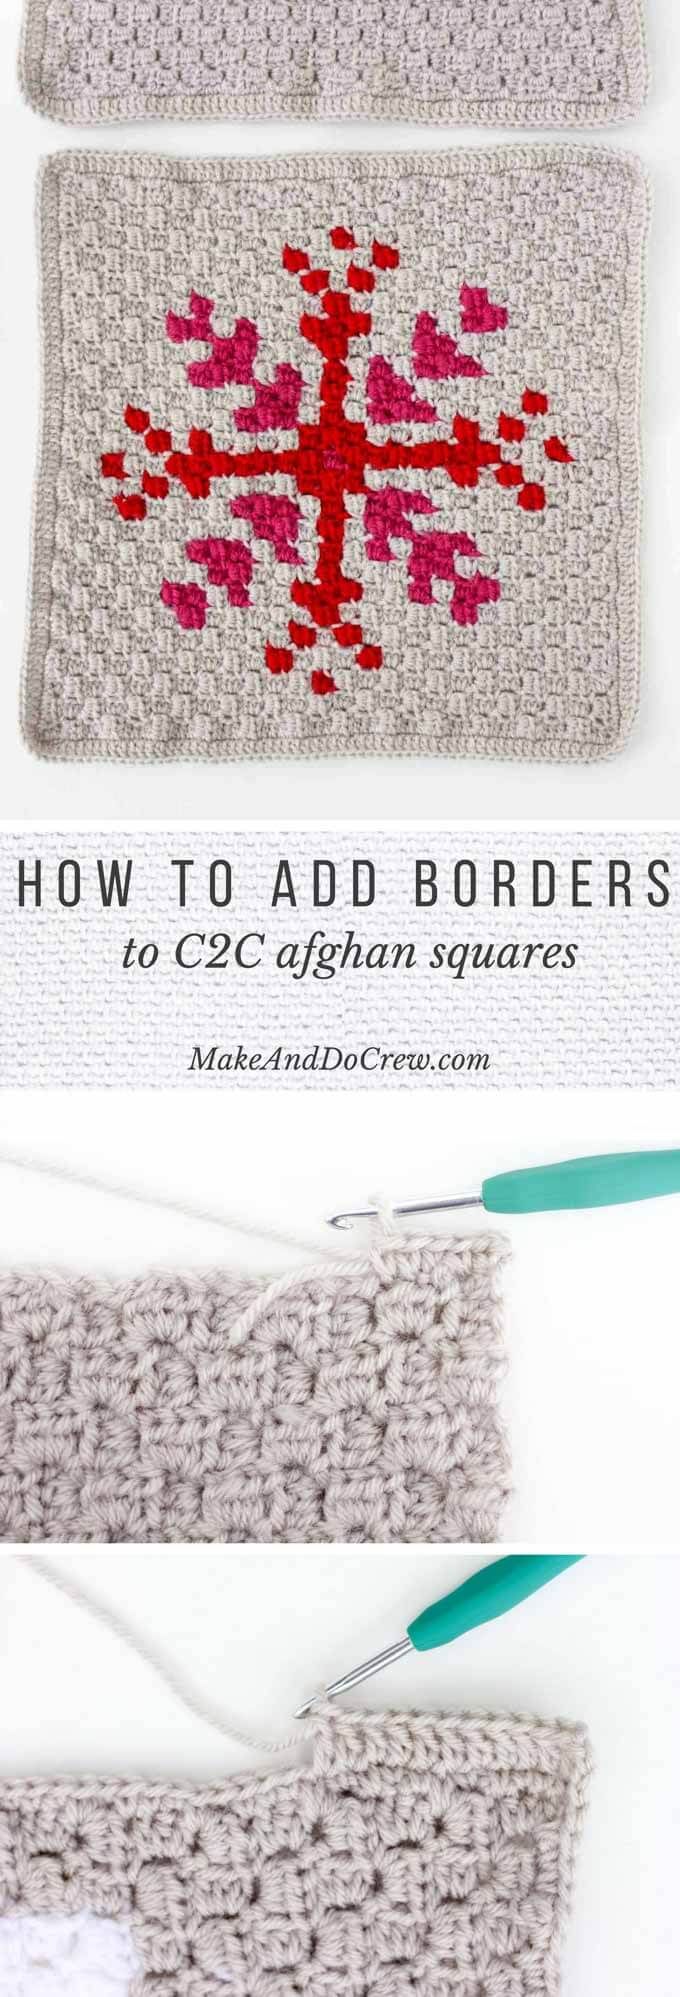 How To Add a Border to a C2C Afghan Block – Detailed Photo Tutorial